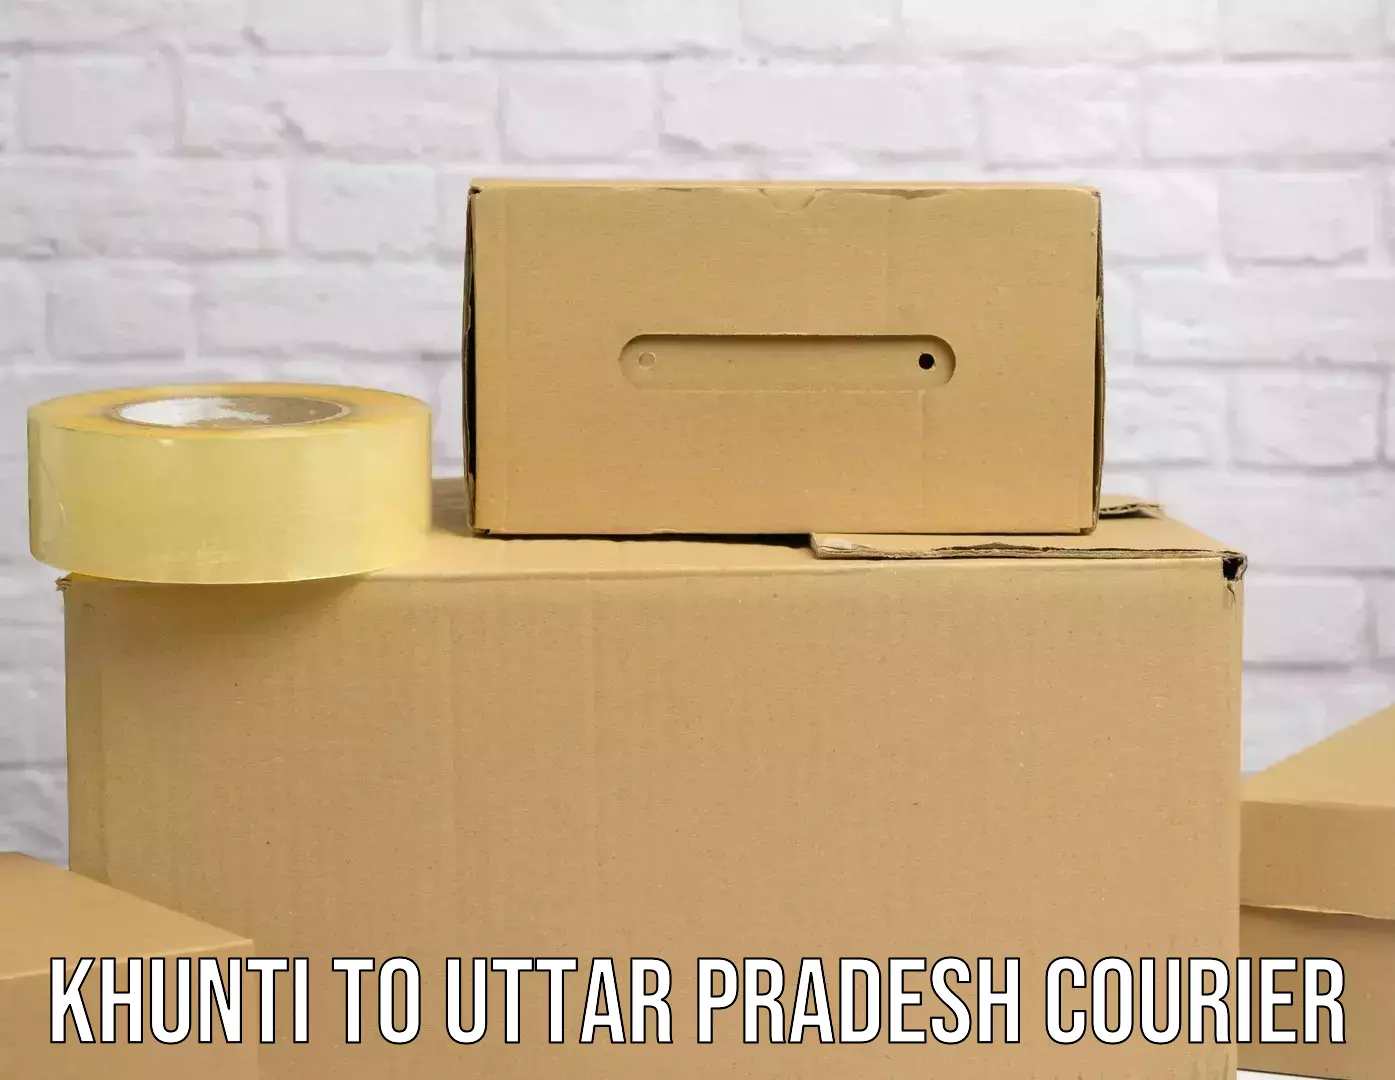 Multi-city courier Khunti to Vrindavan